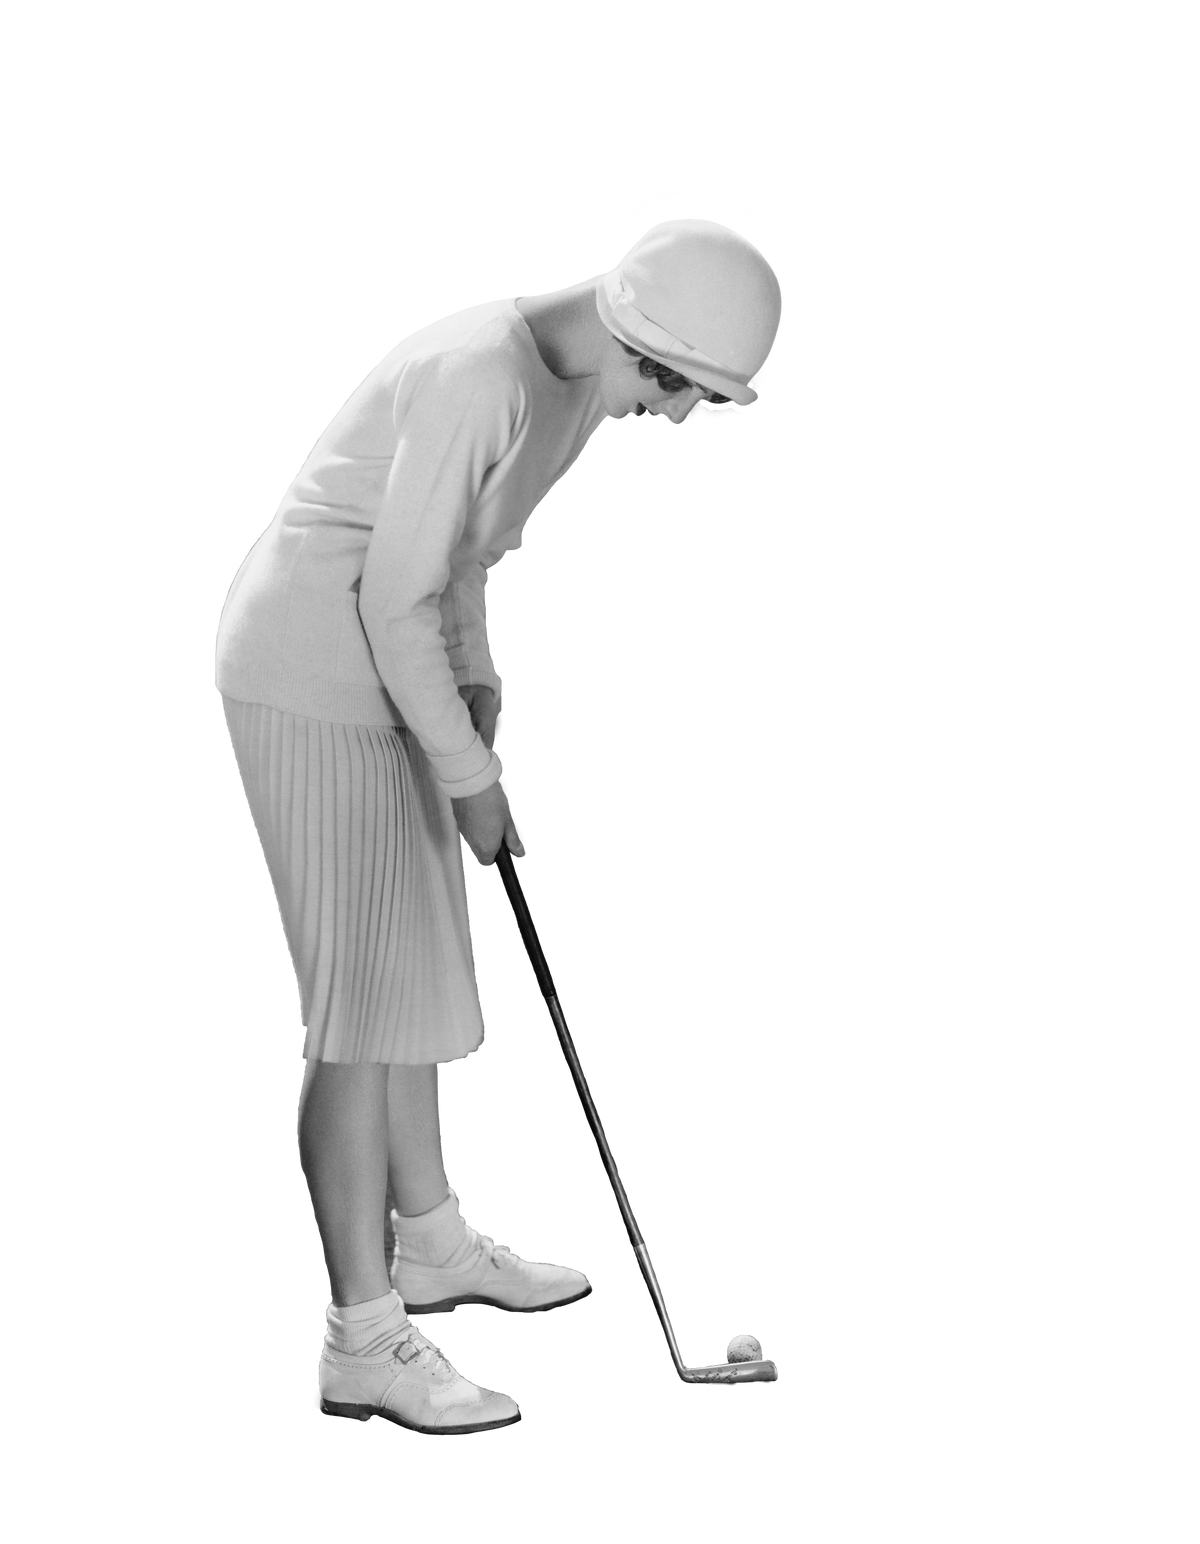 Who was the first Woman to Play Golf?